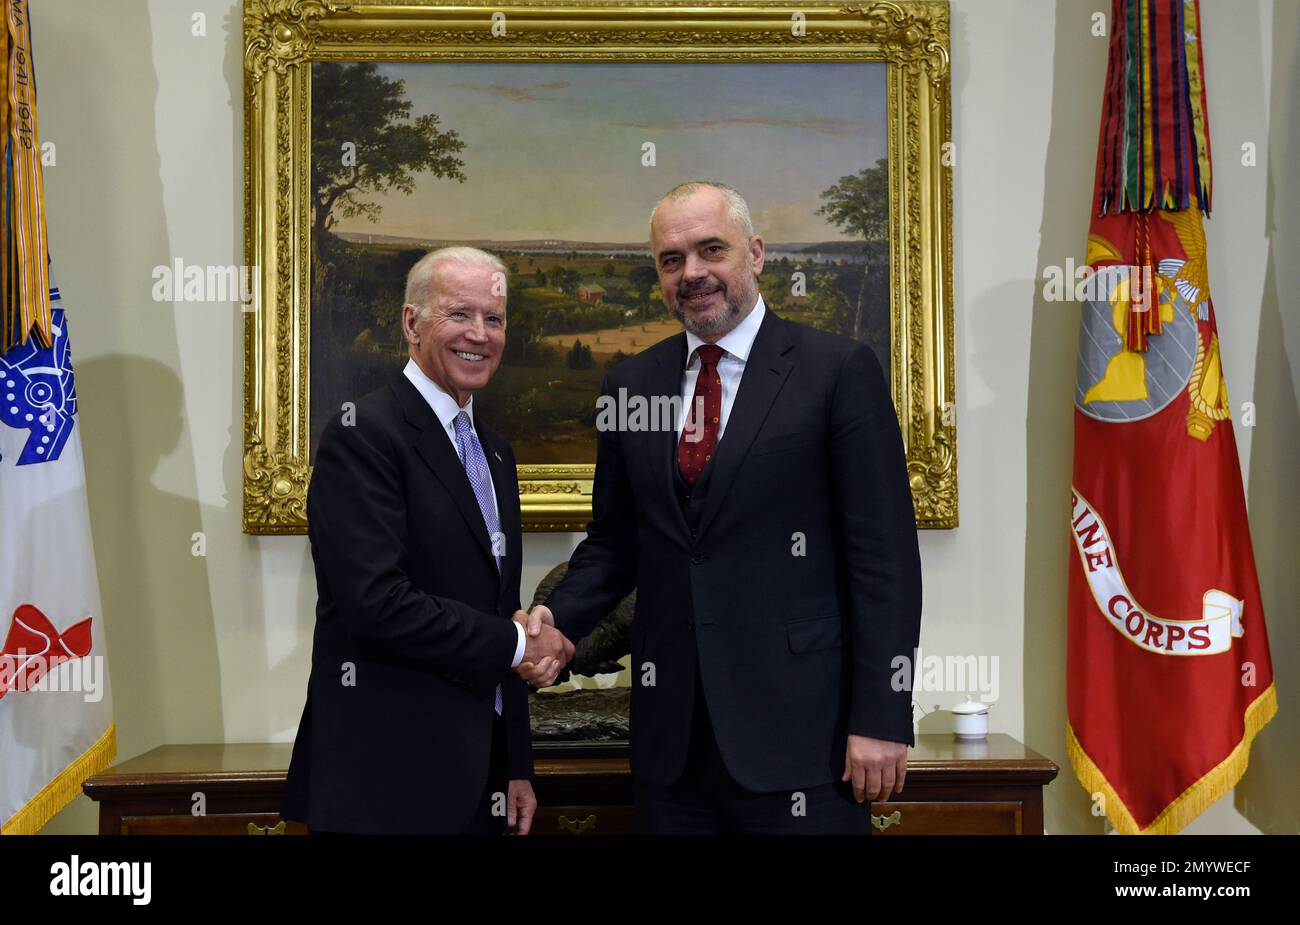 vice-president-joe-biden-shakes-hands-with-albanian-prime-minister-edi-rama-in-the-roosevelt-room-of-the-white-house-in-washington-thursday-april-14-2016-ap-photosusan-walsh-2MYWECF.jpg